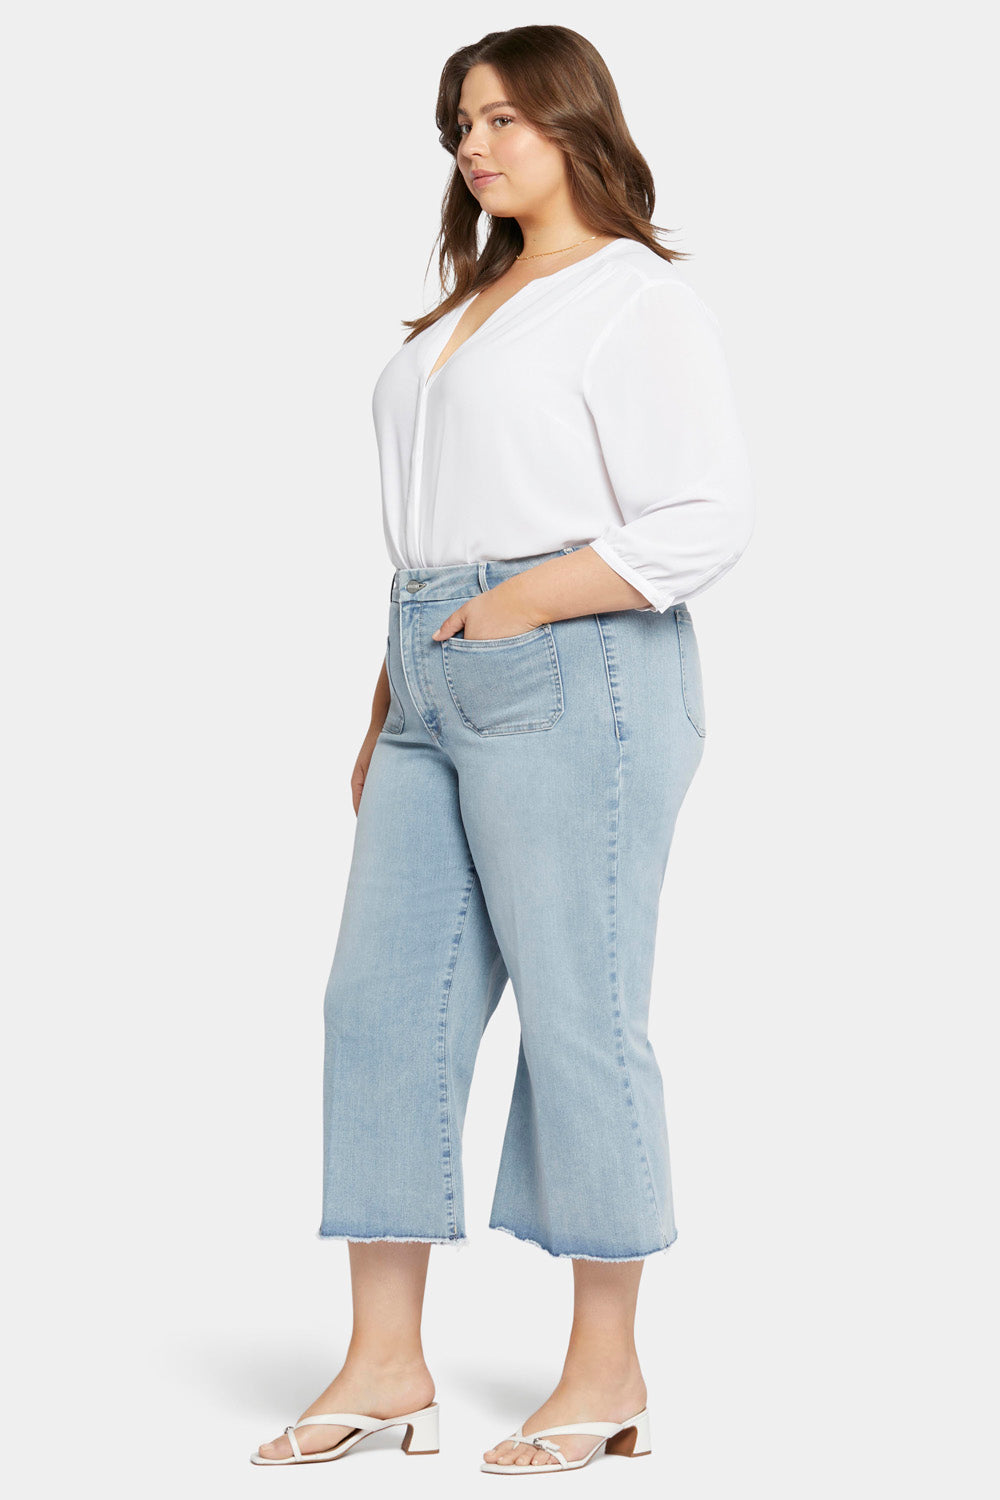 NYDJ Patchie Wide Leg Capri Jeans In Plus Size With Frayed Hems - Divine